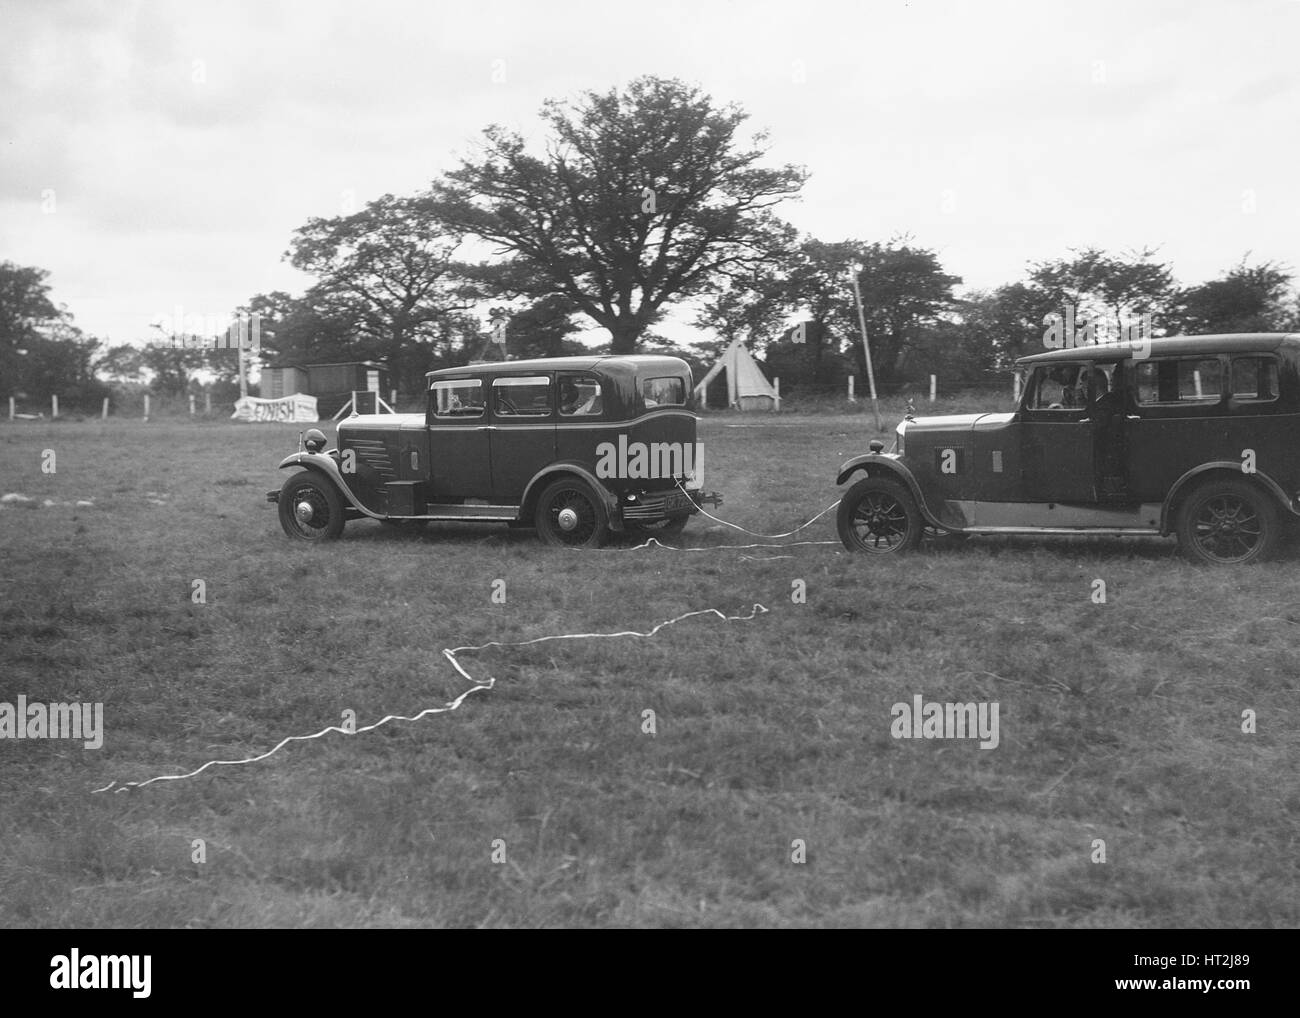 Singer Super Six and Singer Senior taking part in the Bugatti Owners Club gymkhana, 5 July 1931. Artist: Bill Brunell. Stock Photo